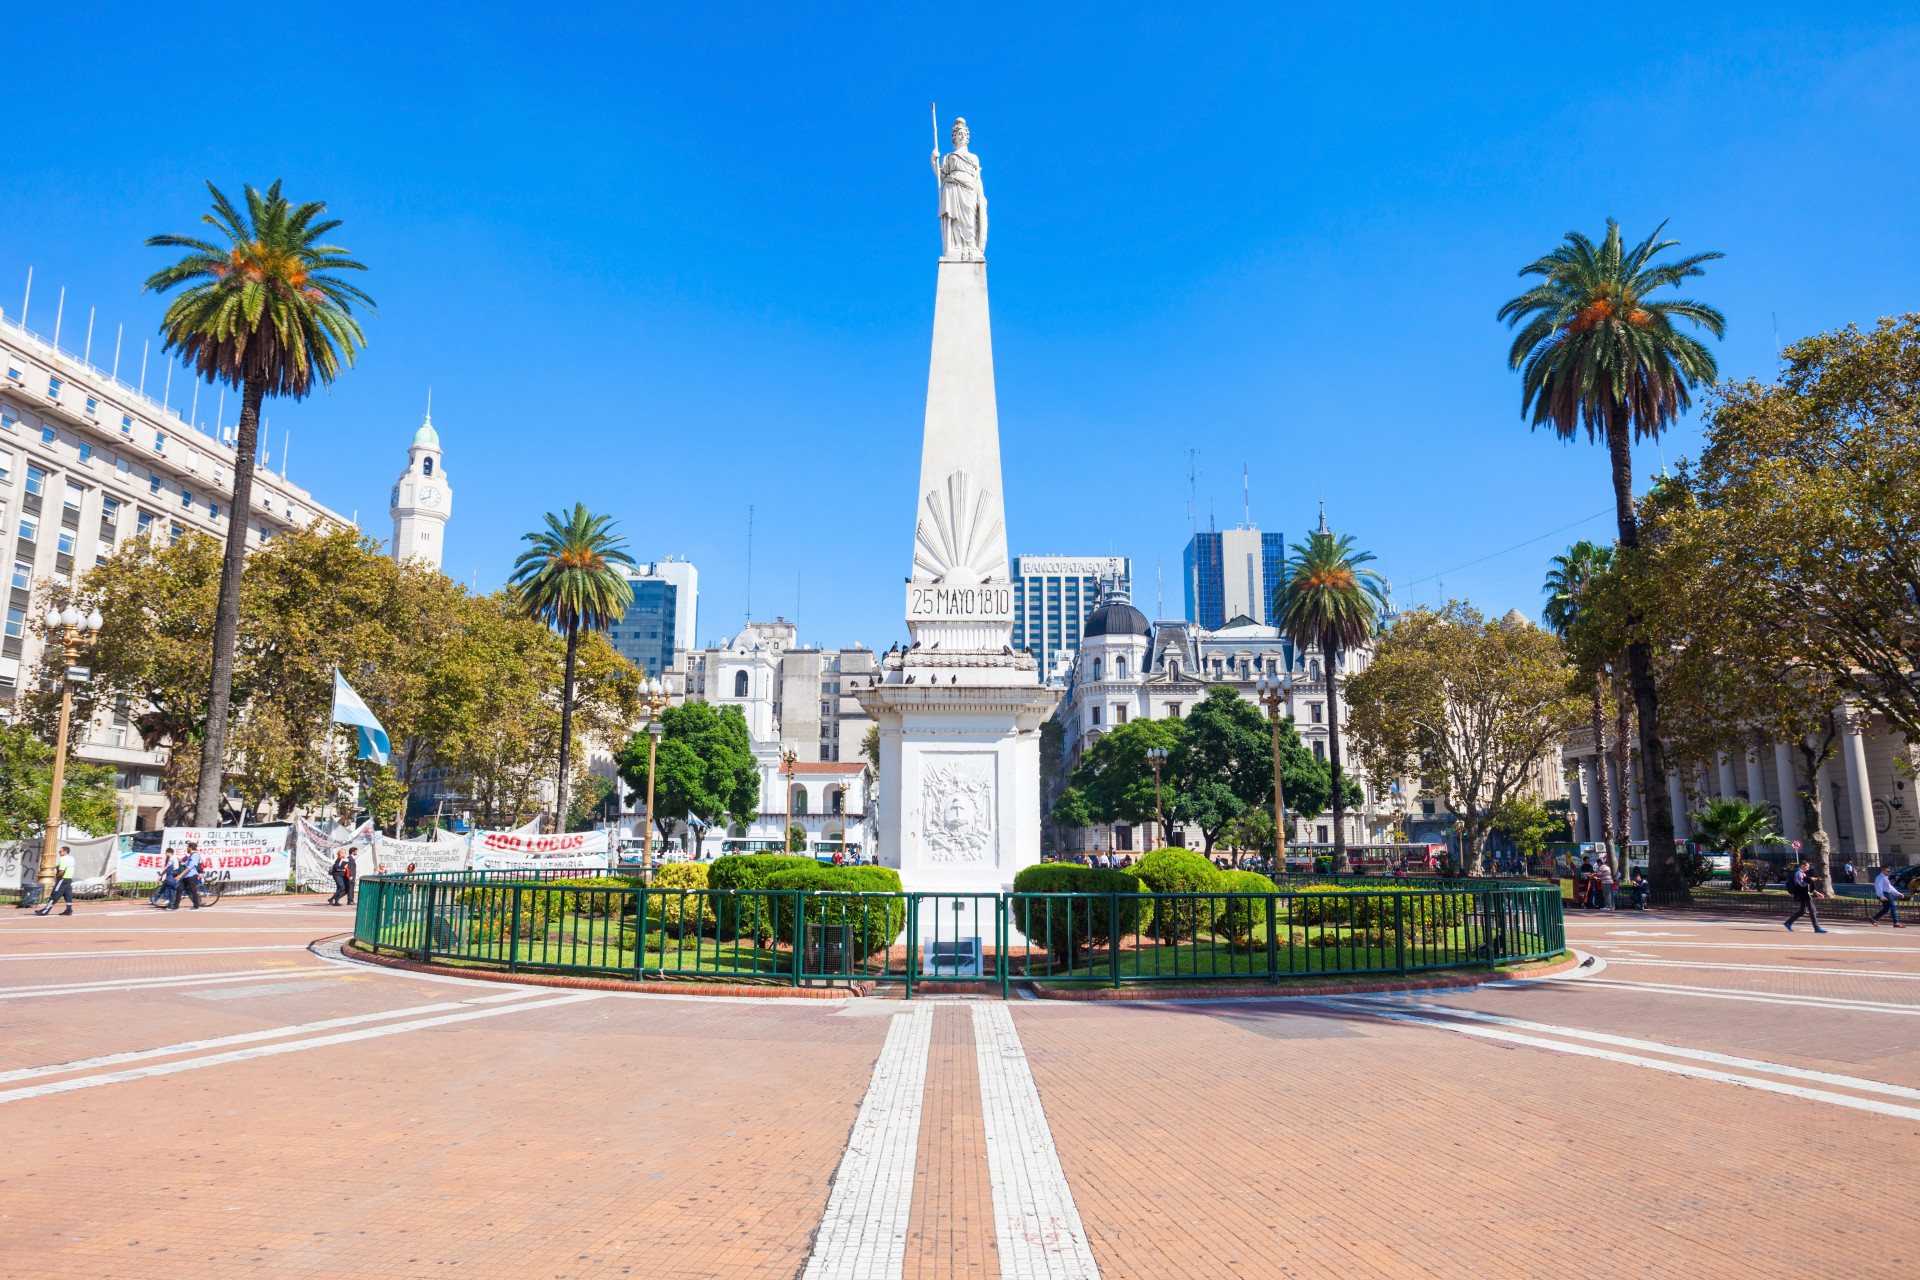 South America's most "European" city, Buenos Aires is a great place to wander about and explore. The Plaza de Mayo is a good place to start.<p><a href="https://www.msn.com/en-sg/community/channel/vid-7xx8mnucu55yw63we9va2gwr7uihbxwc68fxqp25x6tg4ftibpra?cvid=94631541bc0f4f89bfd59158d696ad7e">Follow us and access great exclusive content every day</a></p>